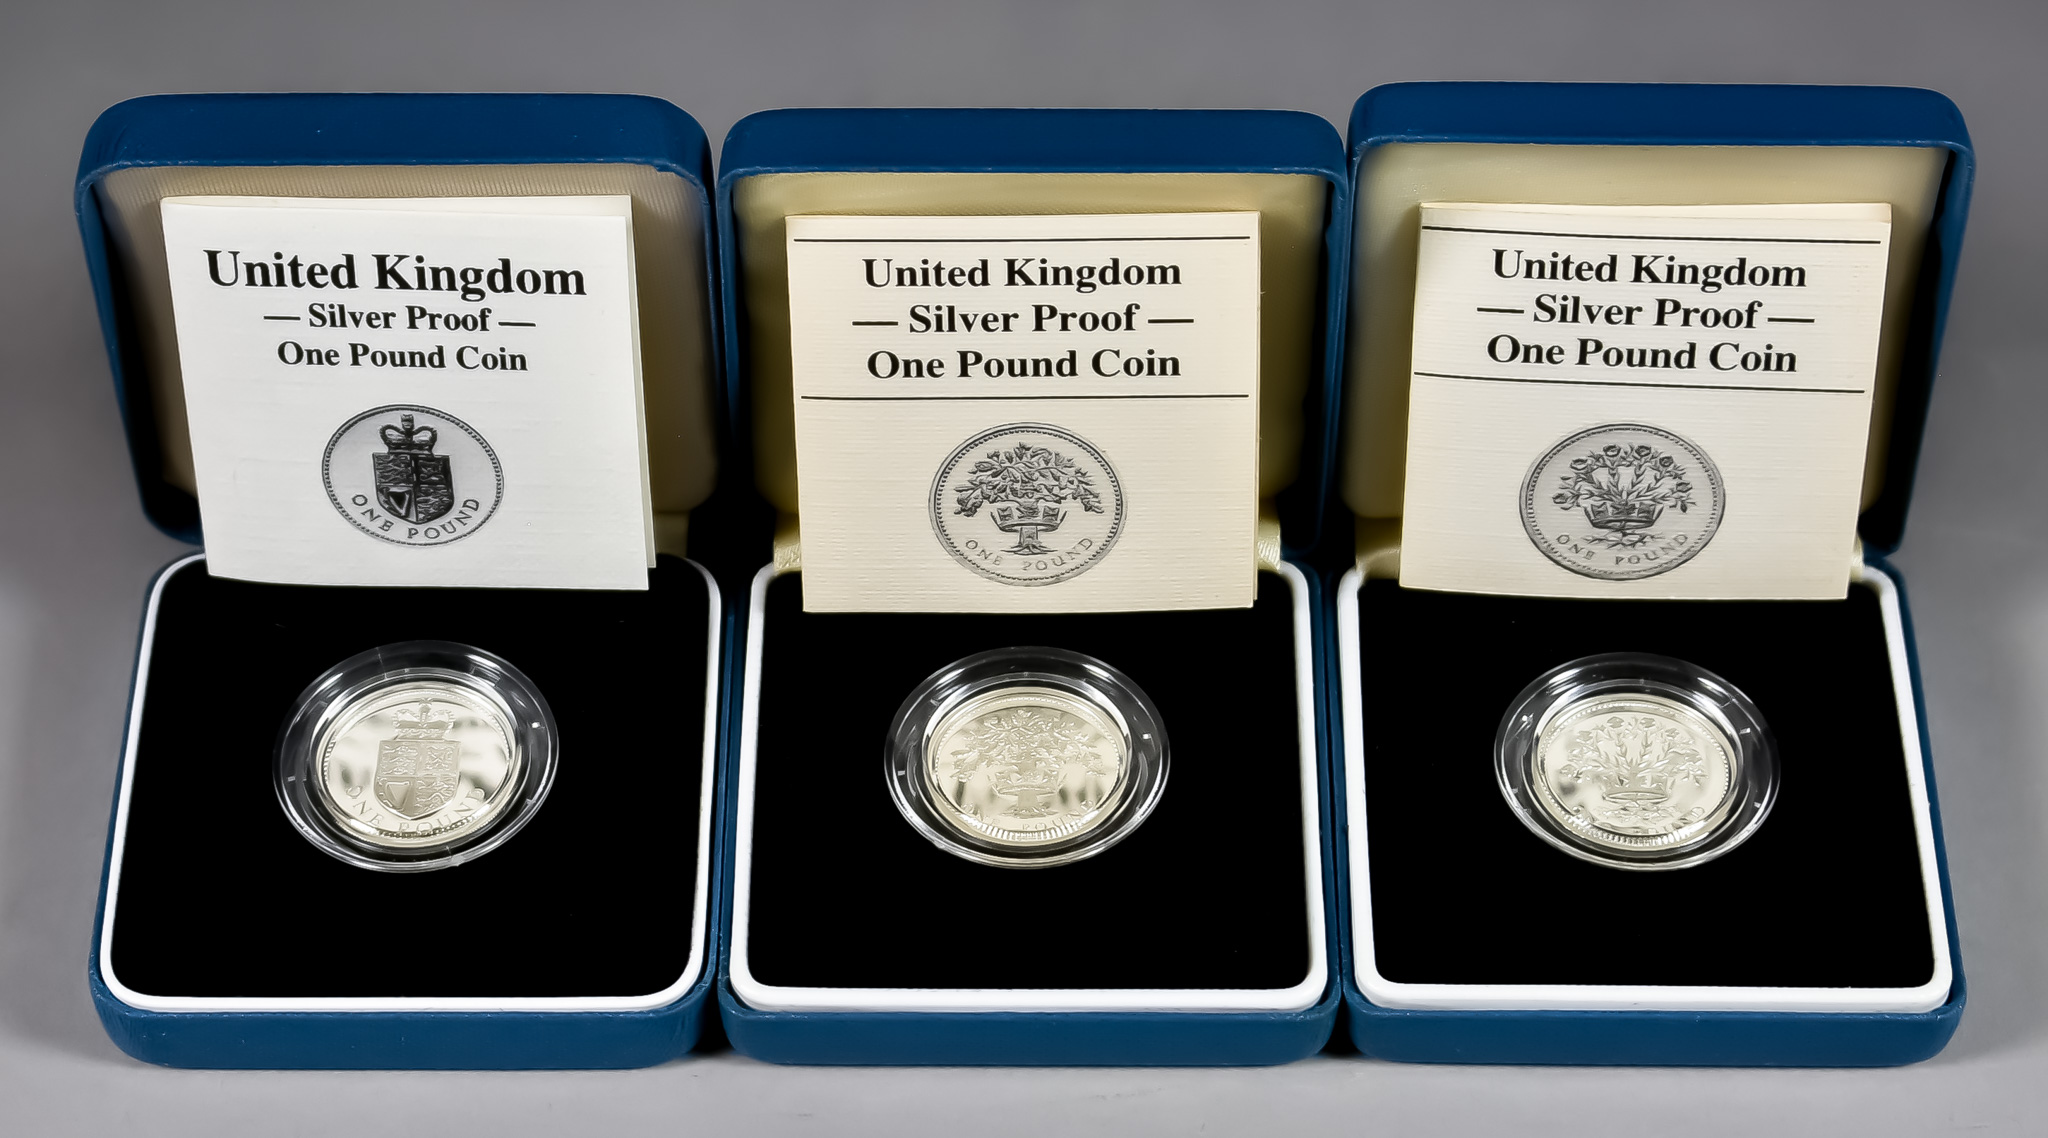 A Quantity of Elizabeth II Silver Proof and Piedfort Commemorative One Pound Coins, all with